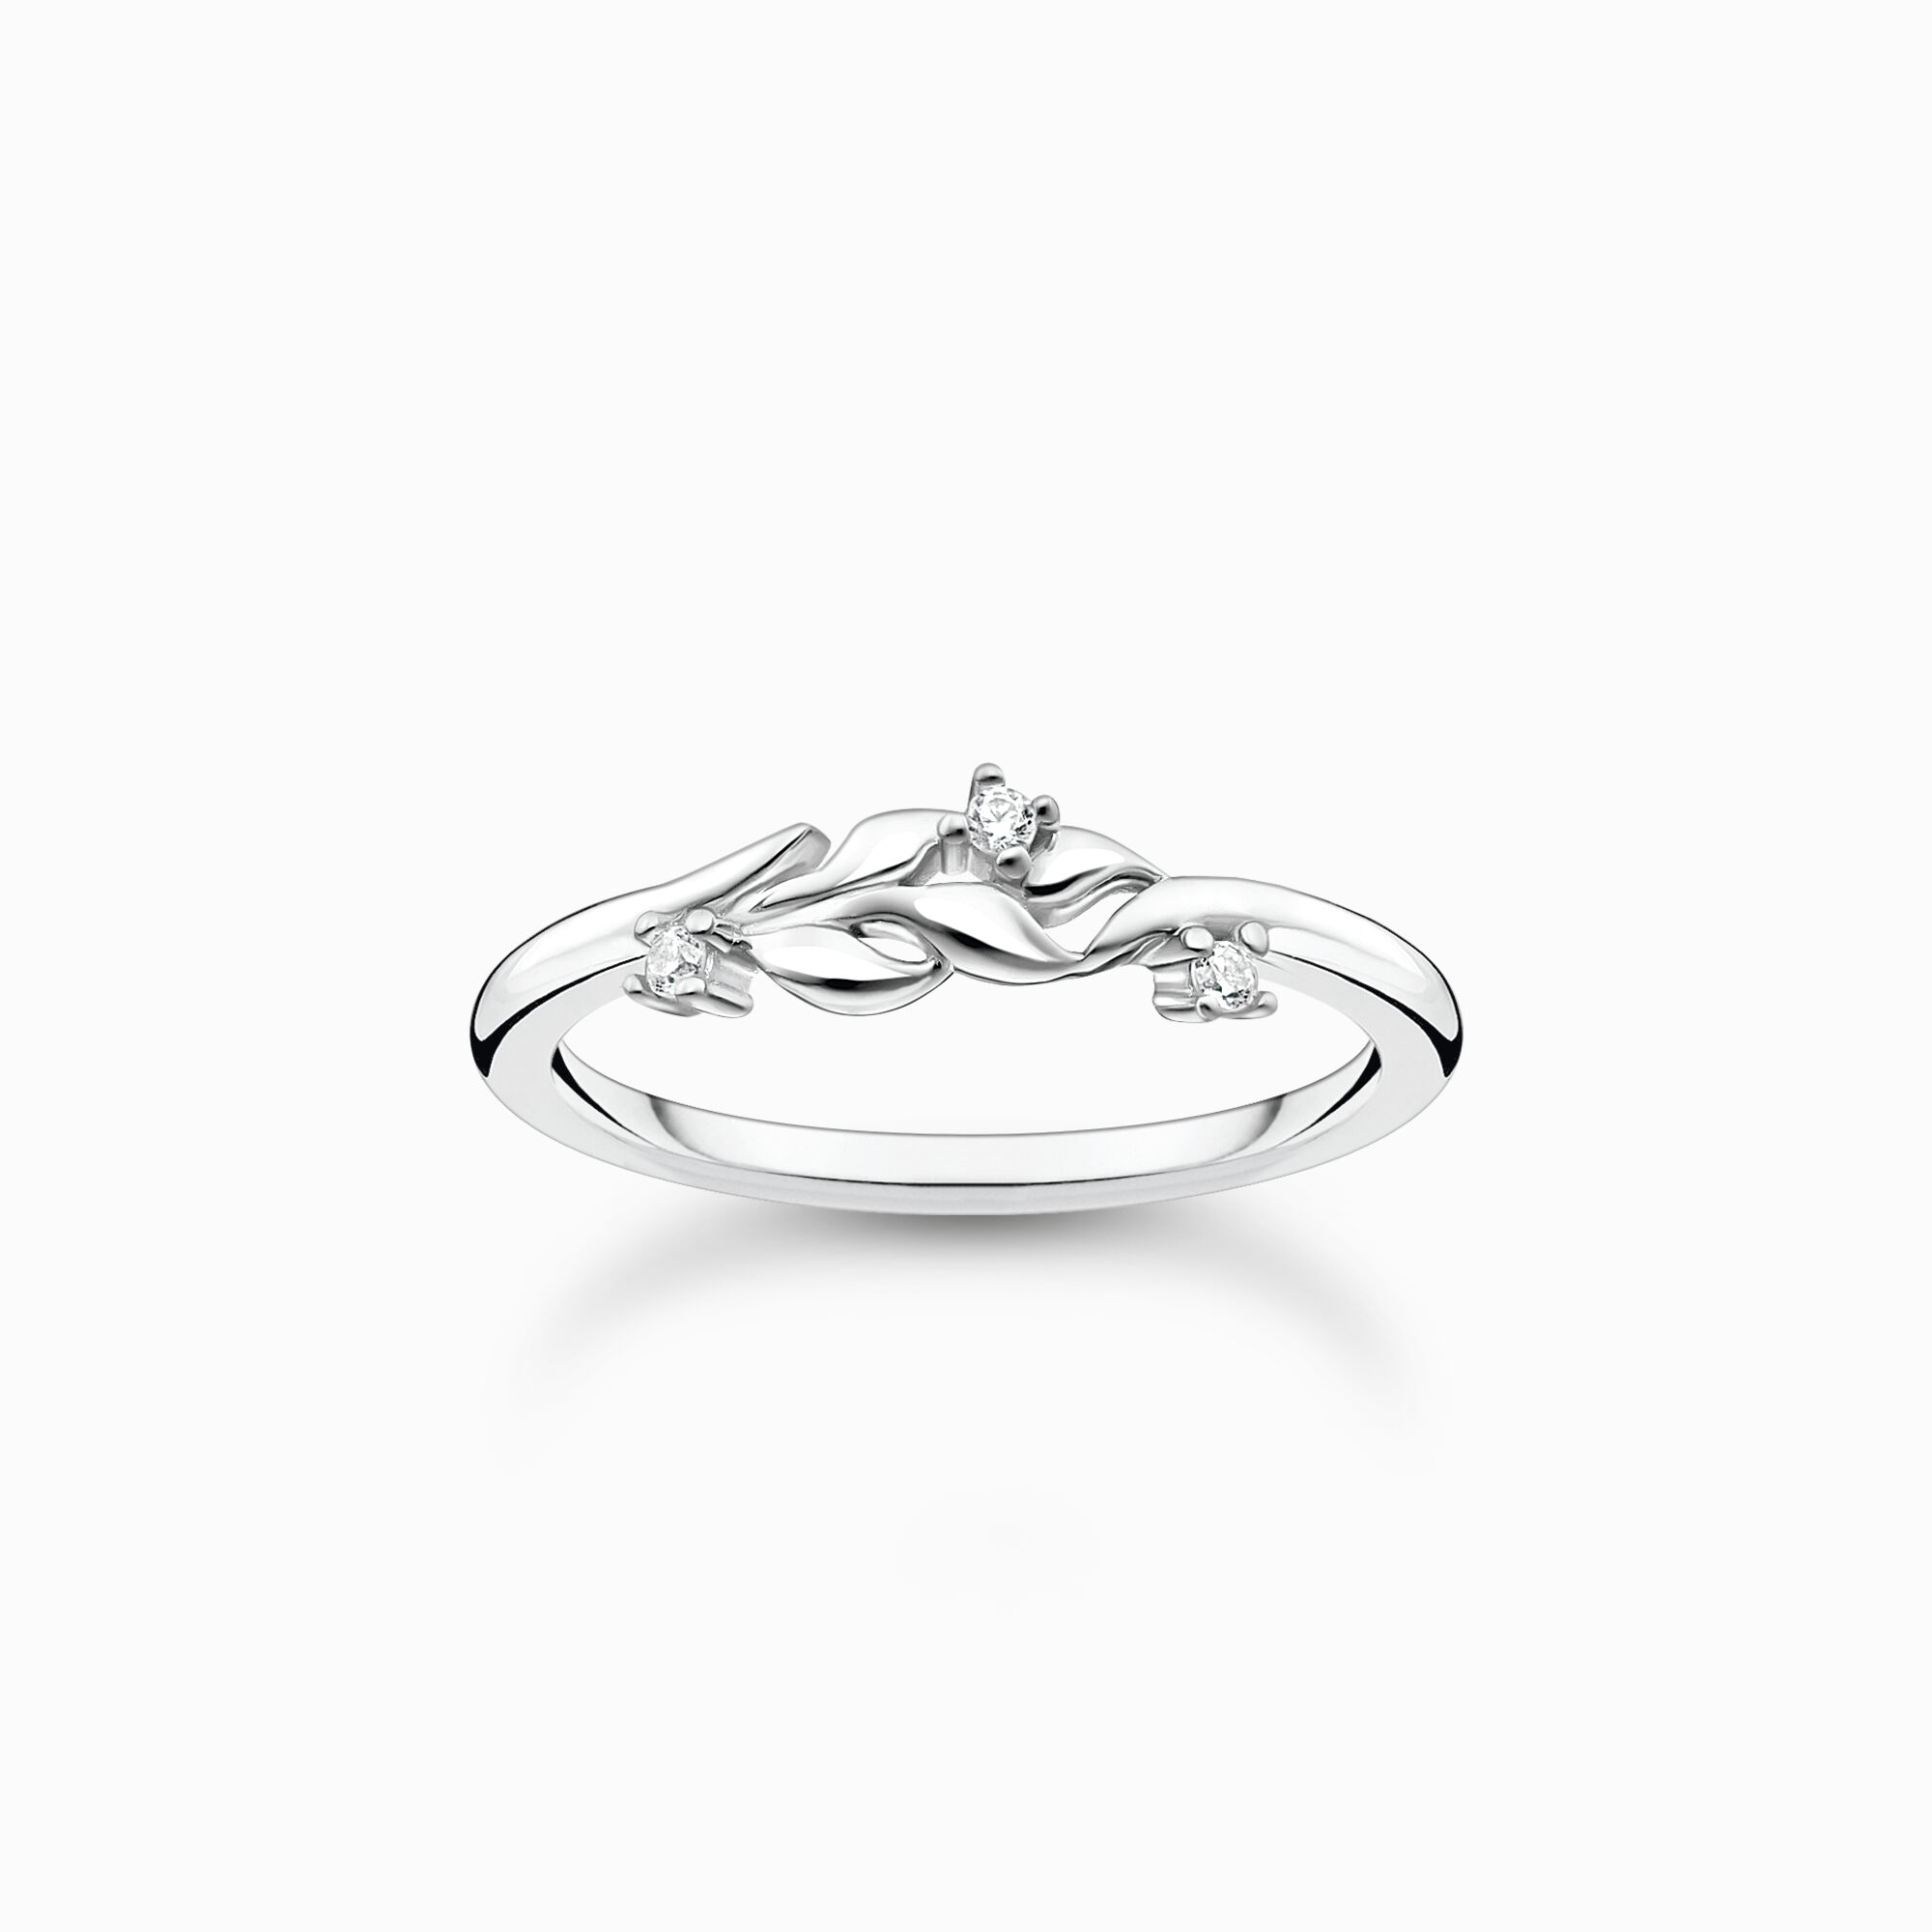 Ring leaves with white stones silver from the Charming Collection collection in the THOMAS SABO online store